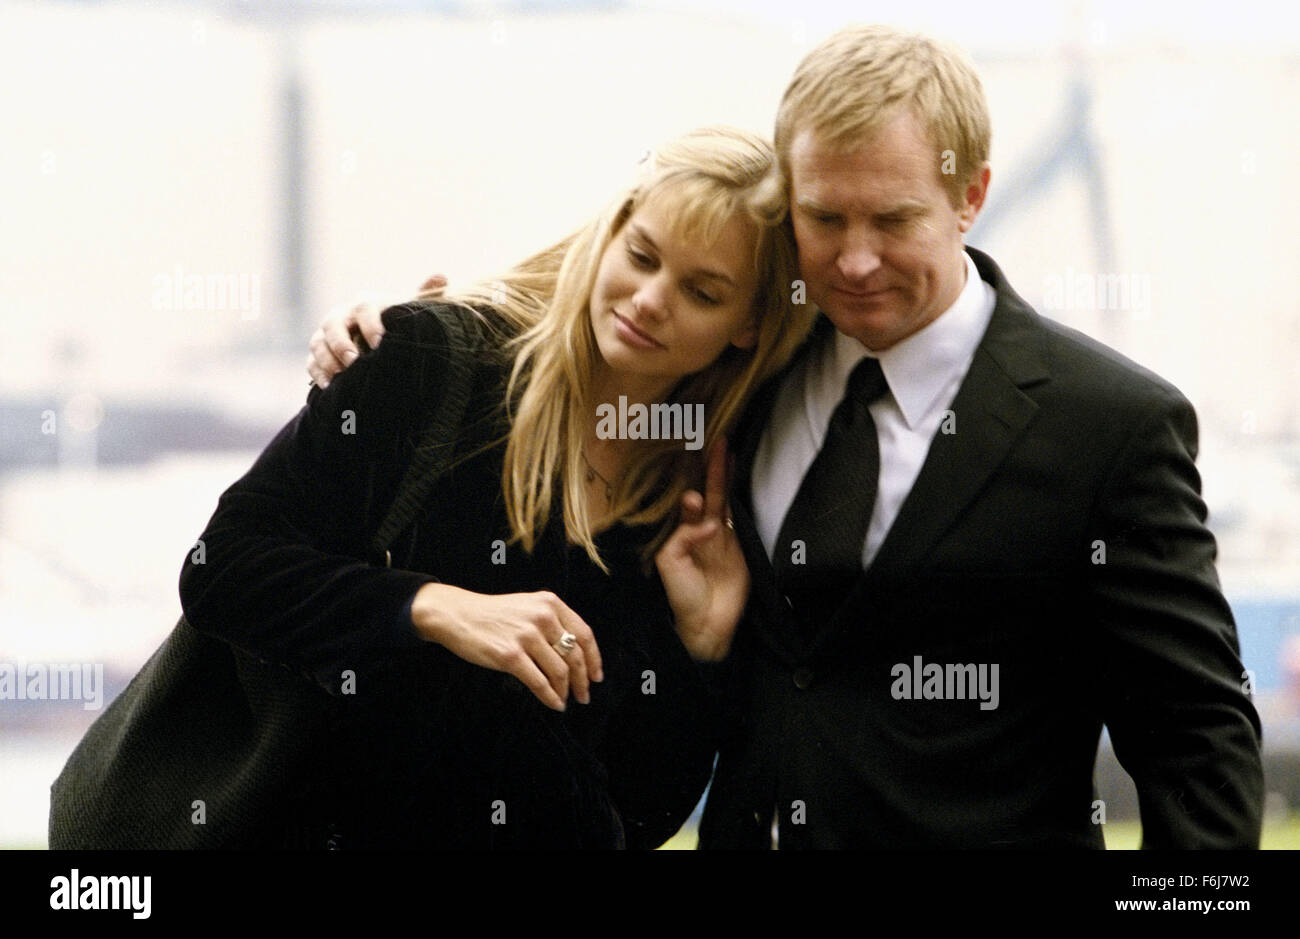 Feb 23, 2003; Stockholm, SWEDEN; Actors ULRICH THOMSEN as Christoffer and LISA WERLINDER as Maria in 'Inheritance'. Directed by Per Fly. Stock Photo